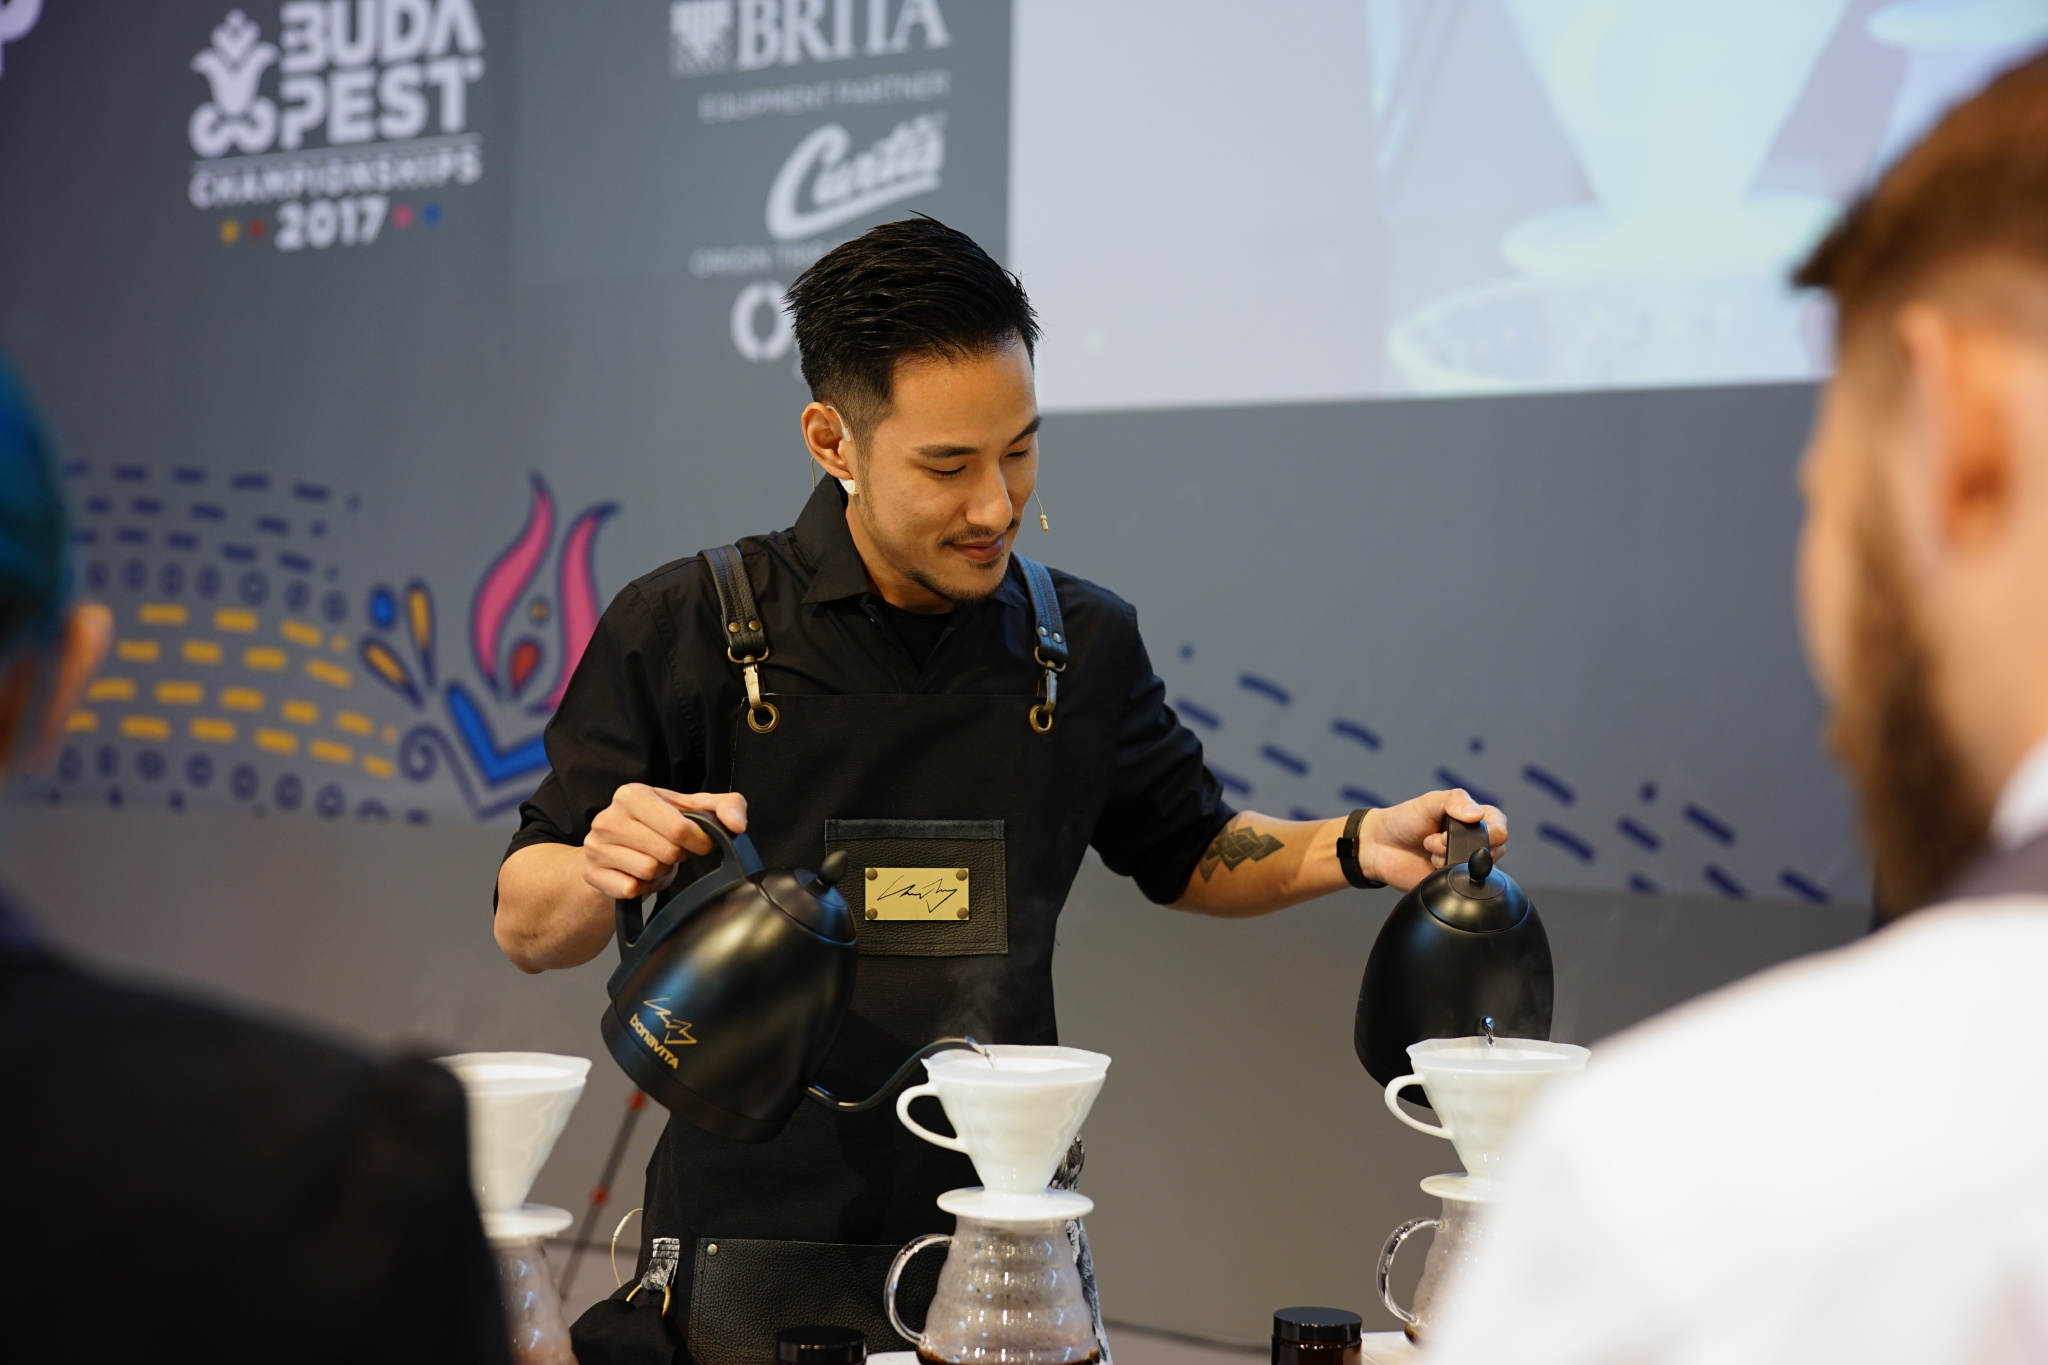 The most important thing for a professional barista is skill or appearance? How to become a professional barista?